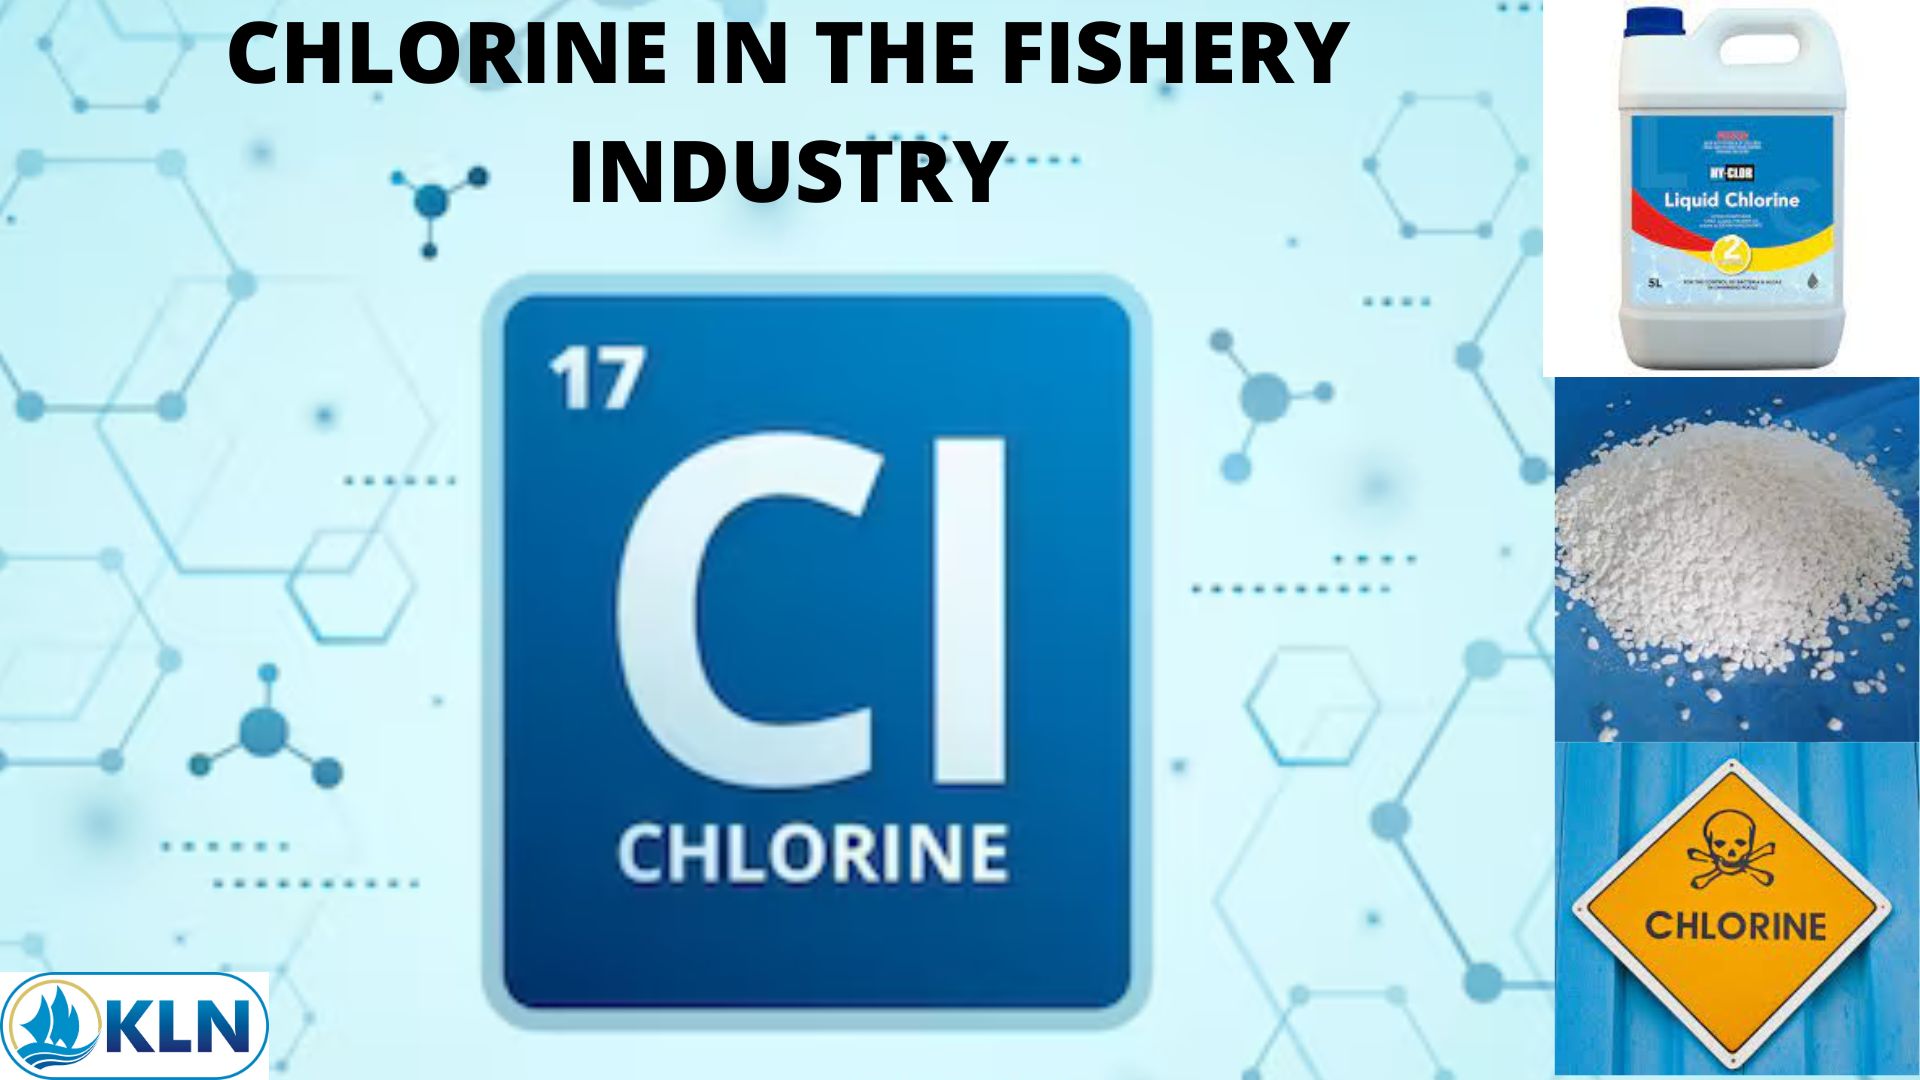 CHLORINE IN THE FISHERY INDUSTRY